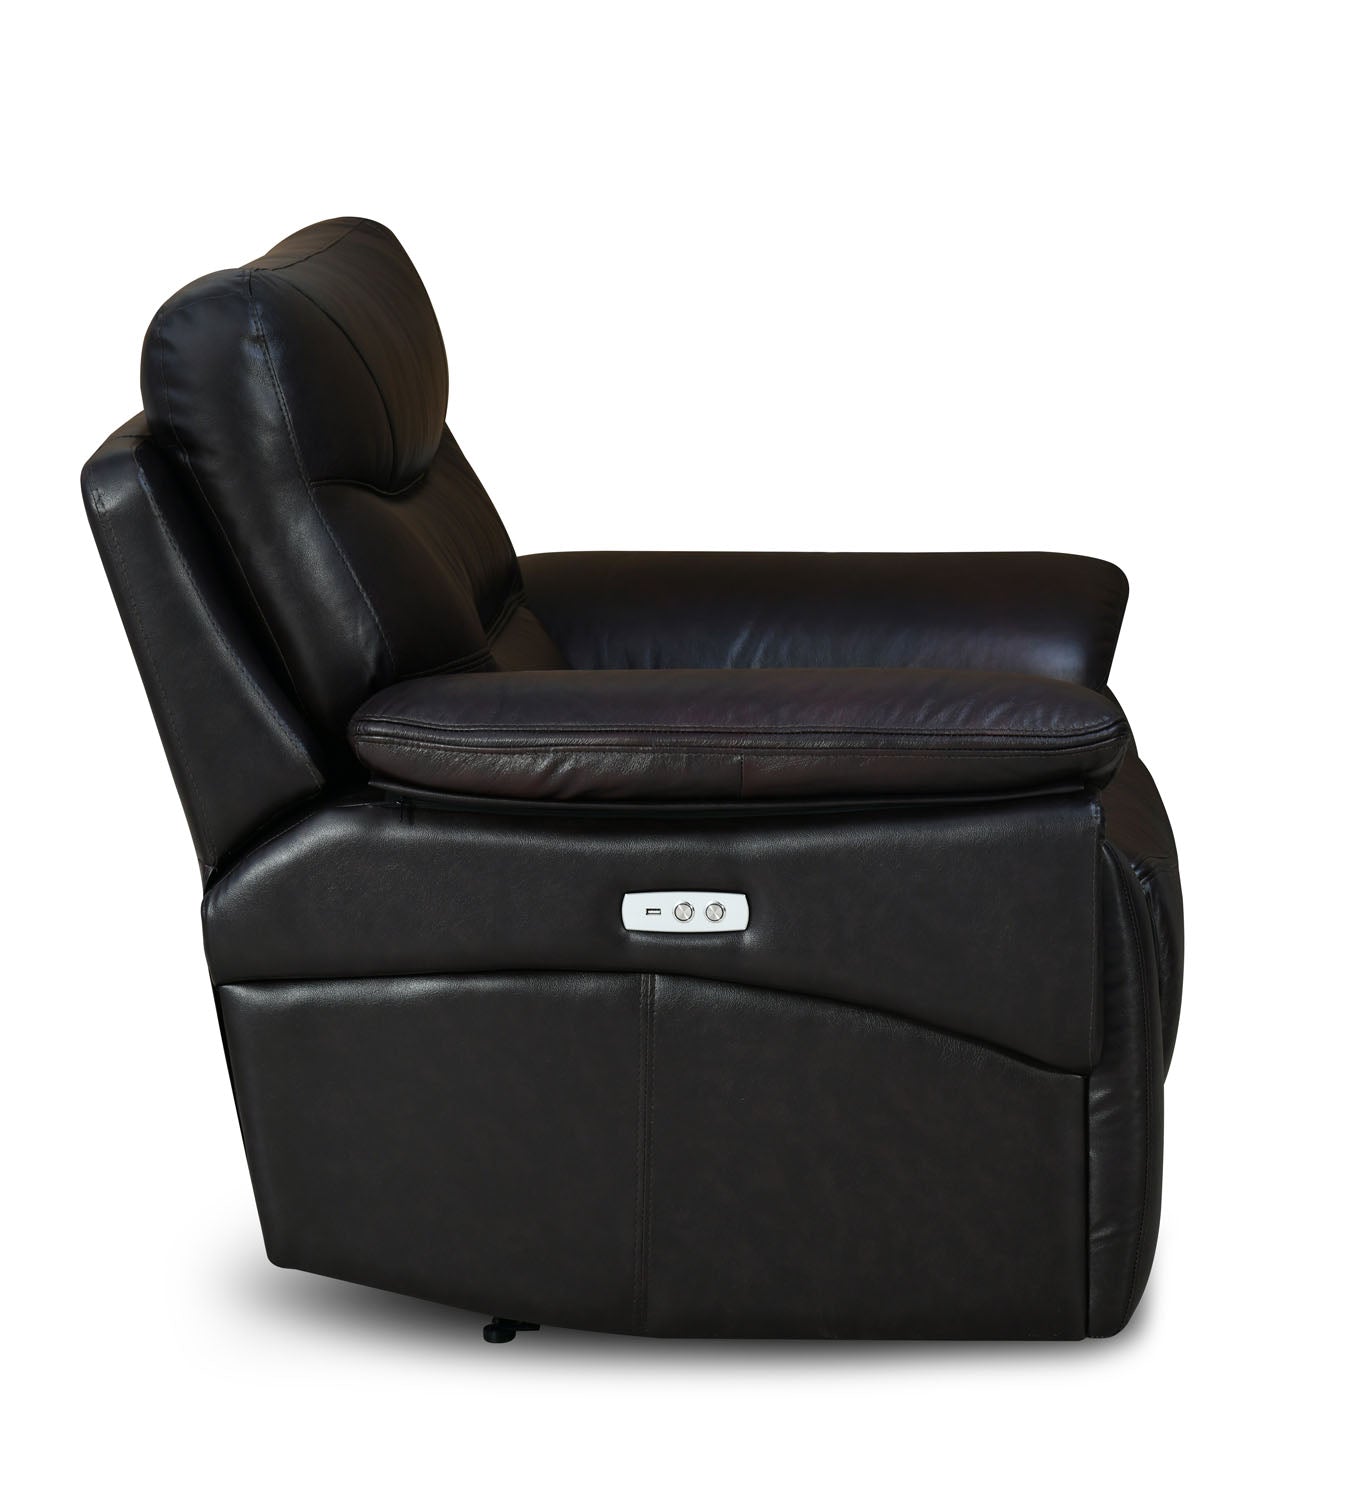 Bakewell 1 Seater Leather Powered Recliner (Brown)